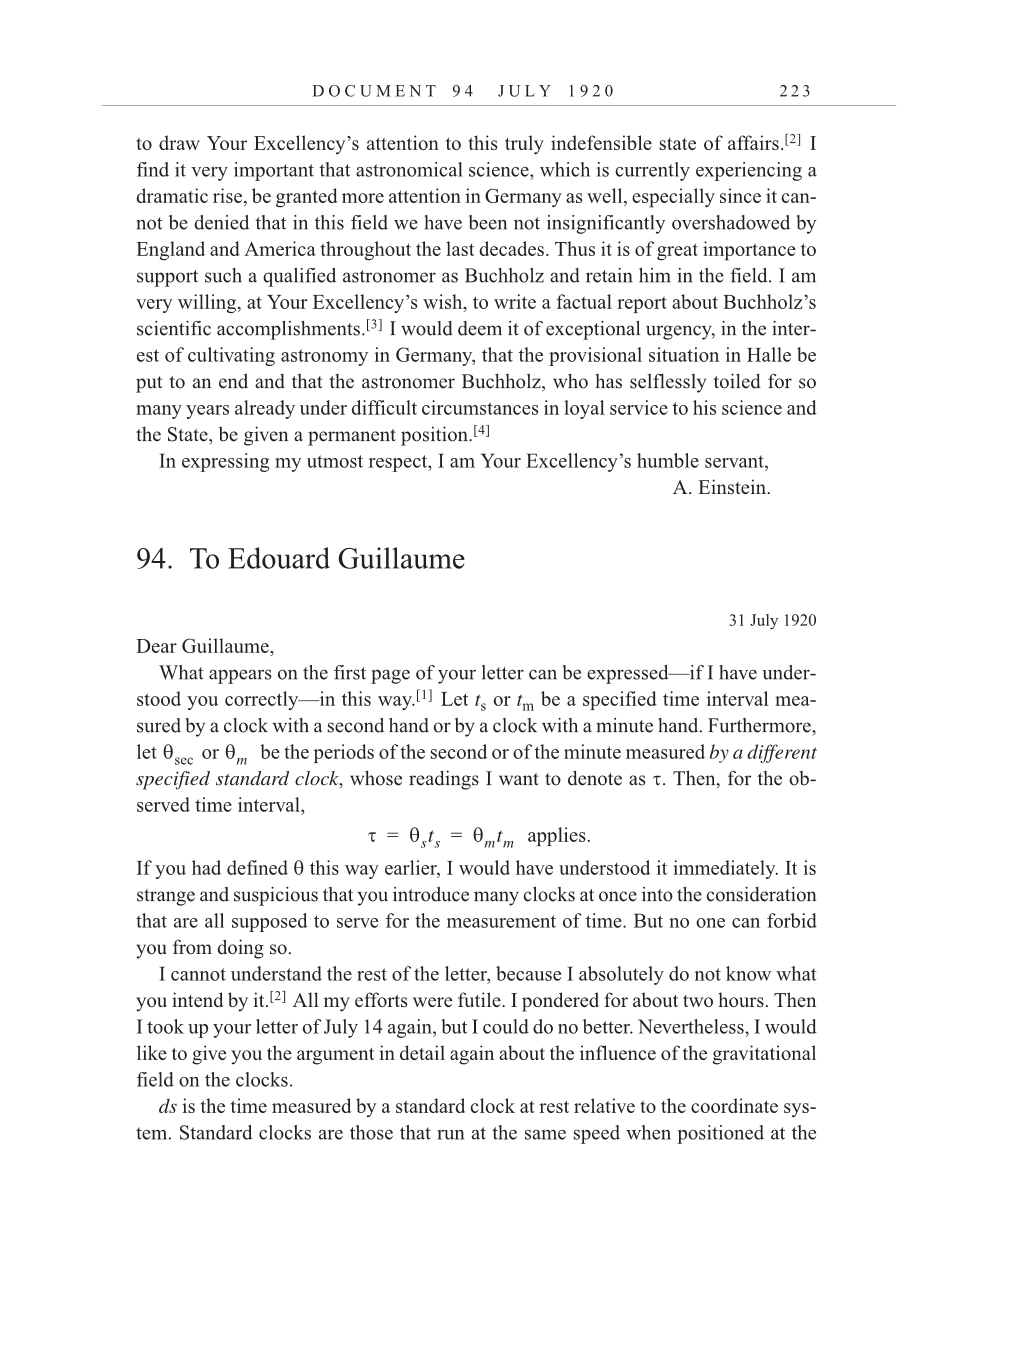 Volume 10: The Berlin Years: Correspondence, May-December 1920, and Supplementary Correspondence, 1909-1920 (English translation supplement) page 223